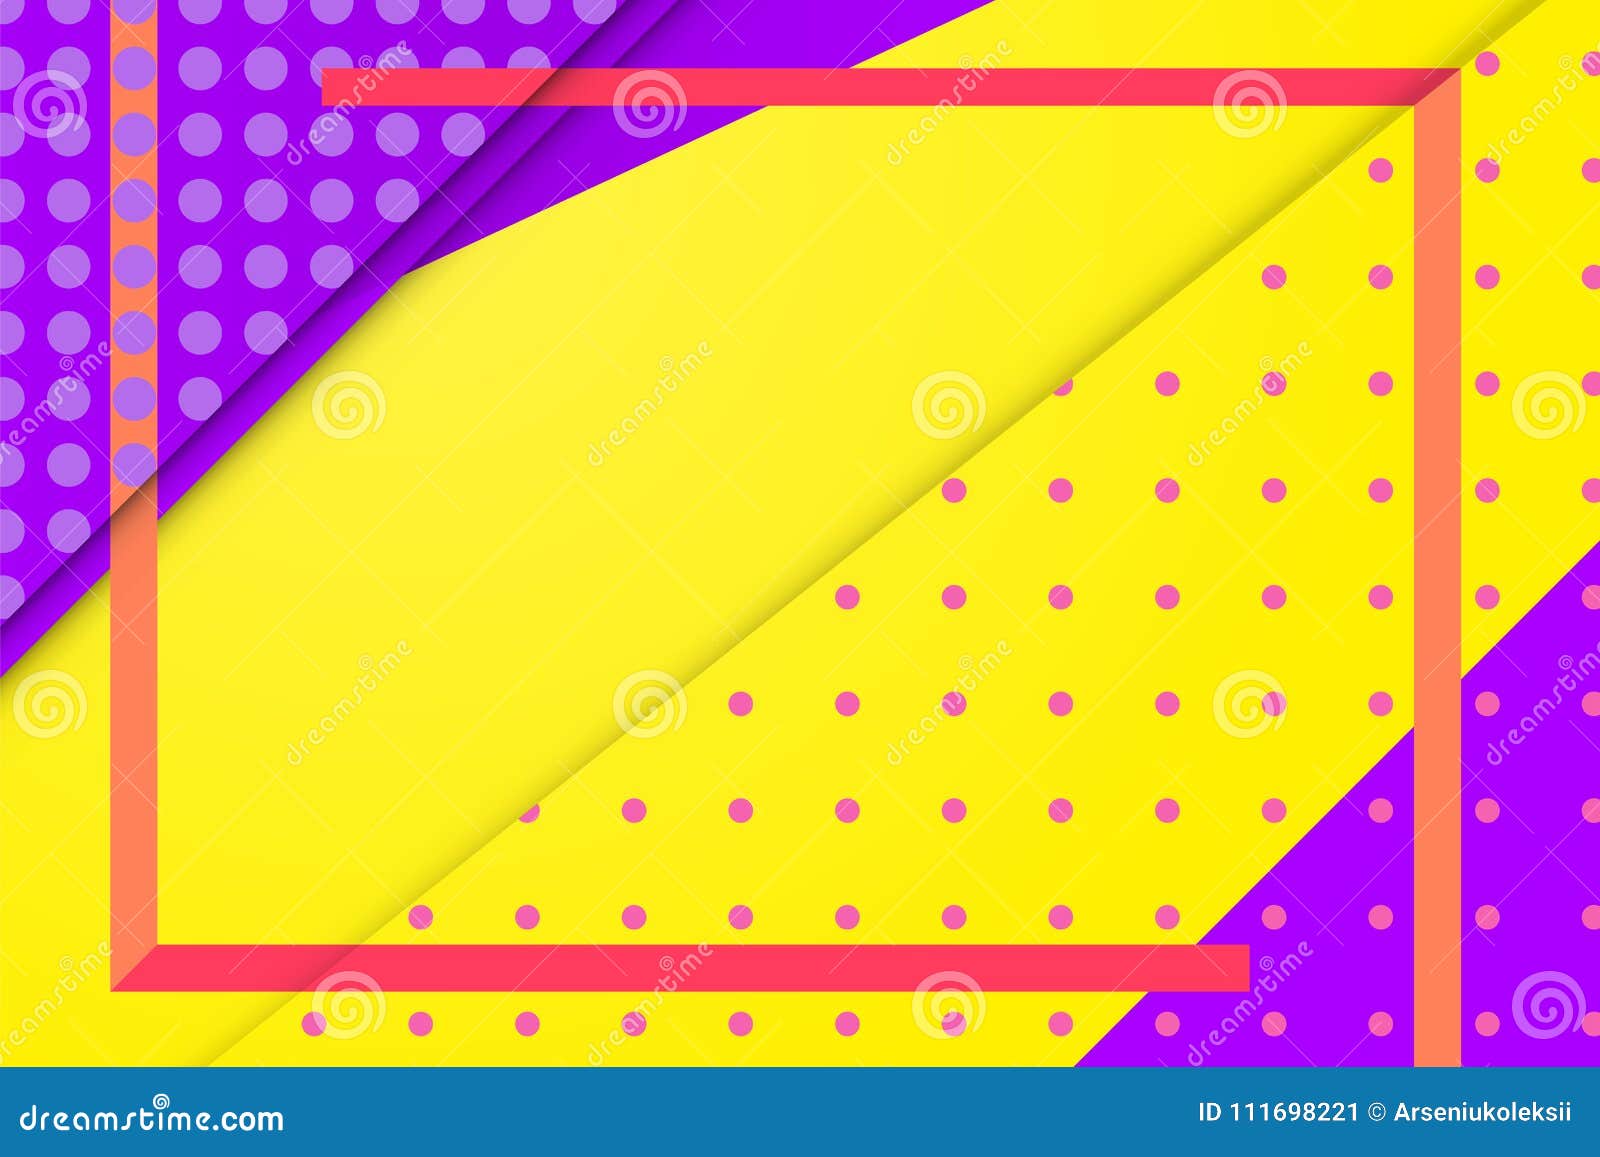 Modern Yellow and Purple Background Stock Vector - Illustration of